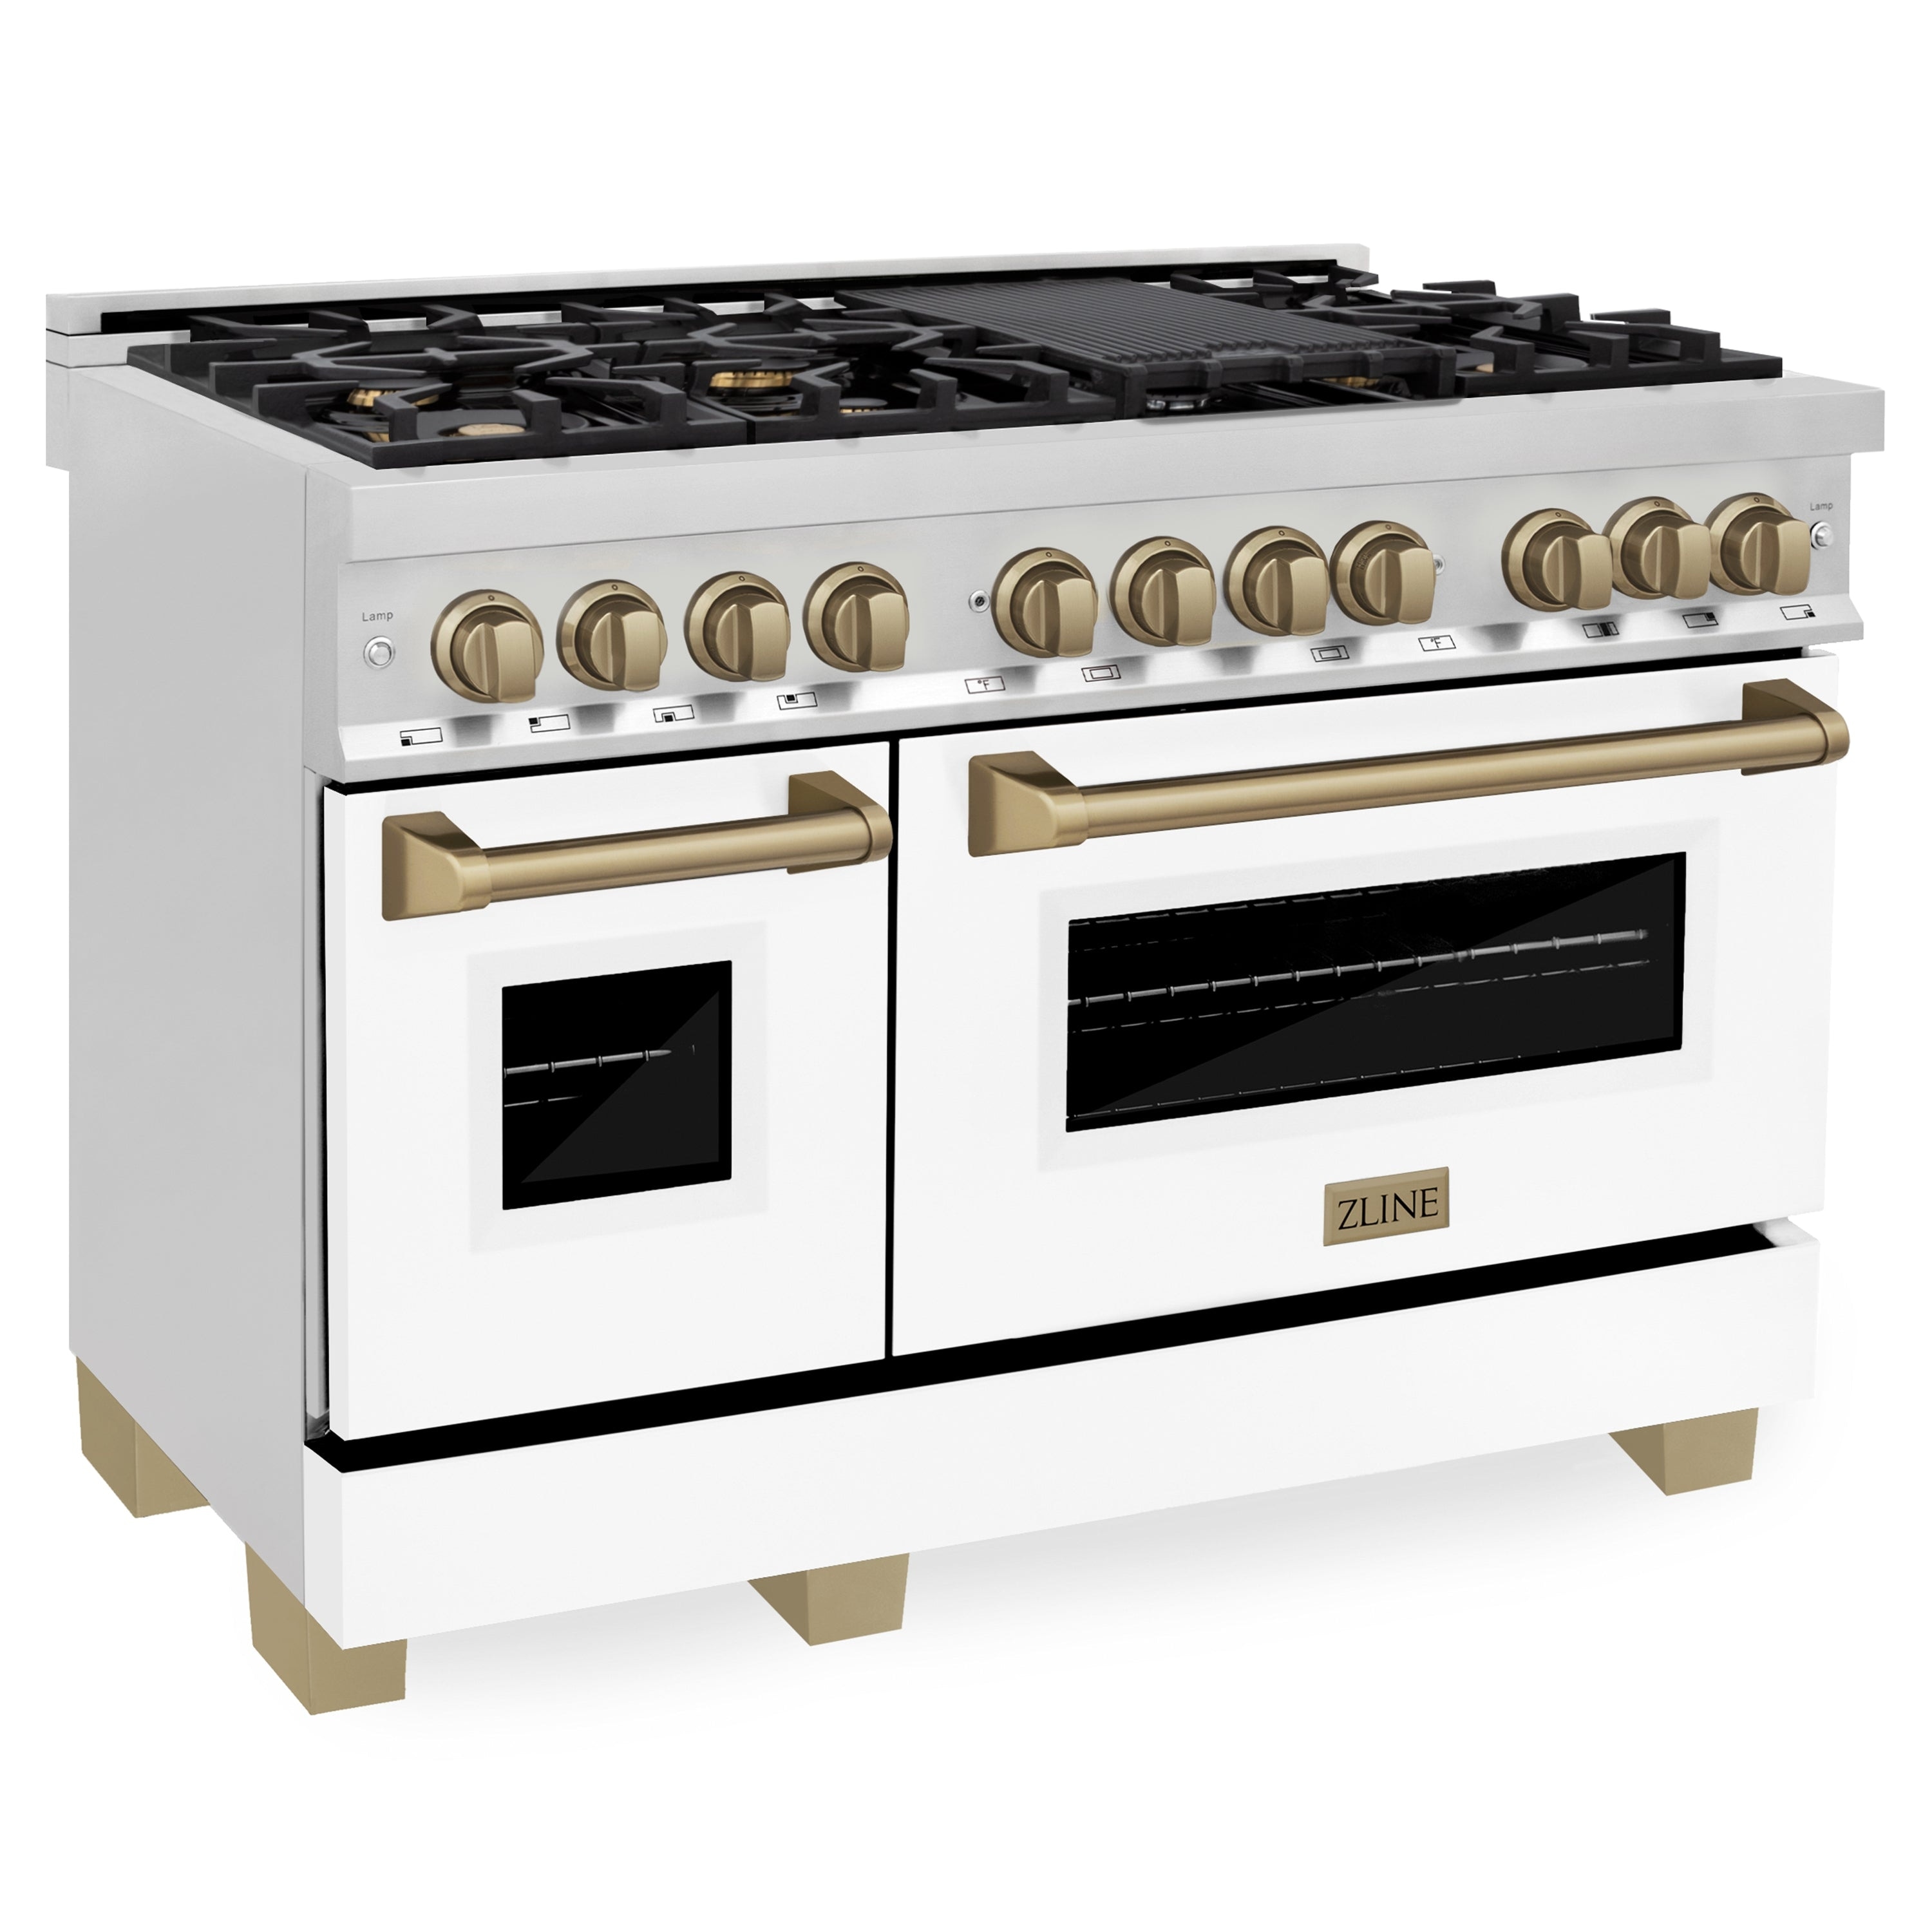 Zline Kitchen and Bath ZLINE Autograph Edition 48" Dual Fuel Range in Stainless Steel, White Matte with Accents